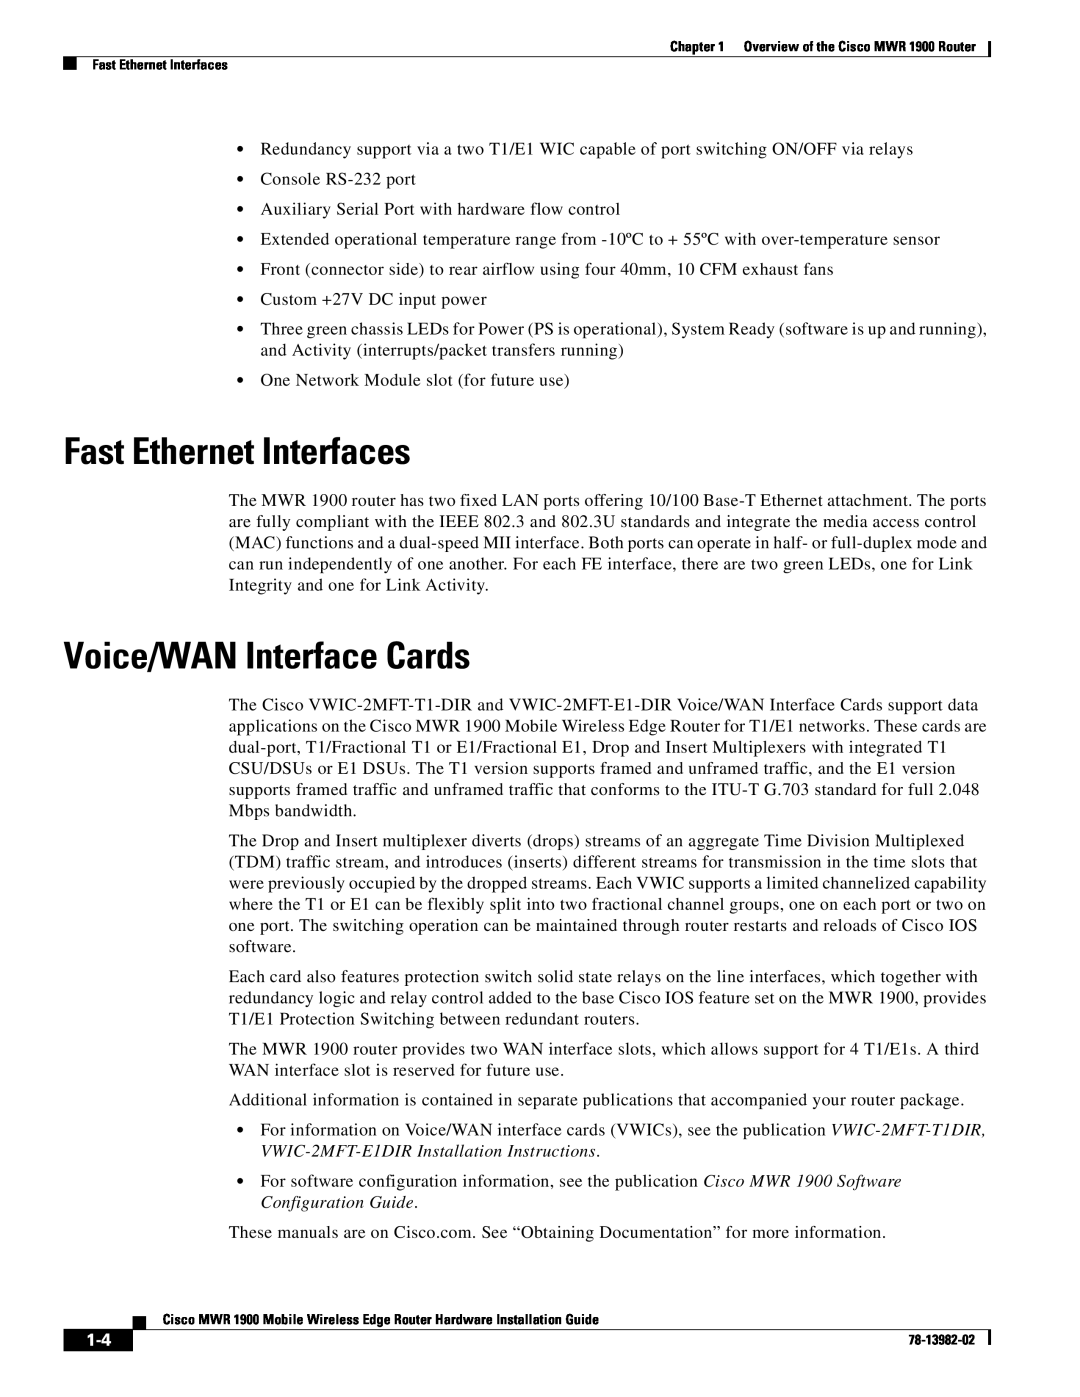 Cisco Systems MWR 1900 manual Fast Ethernet Interfaces, Voice/WAN Interface Cards 